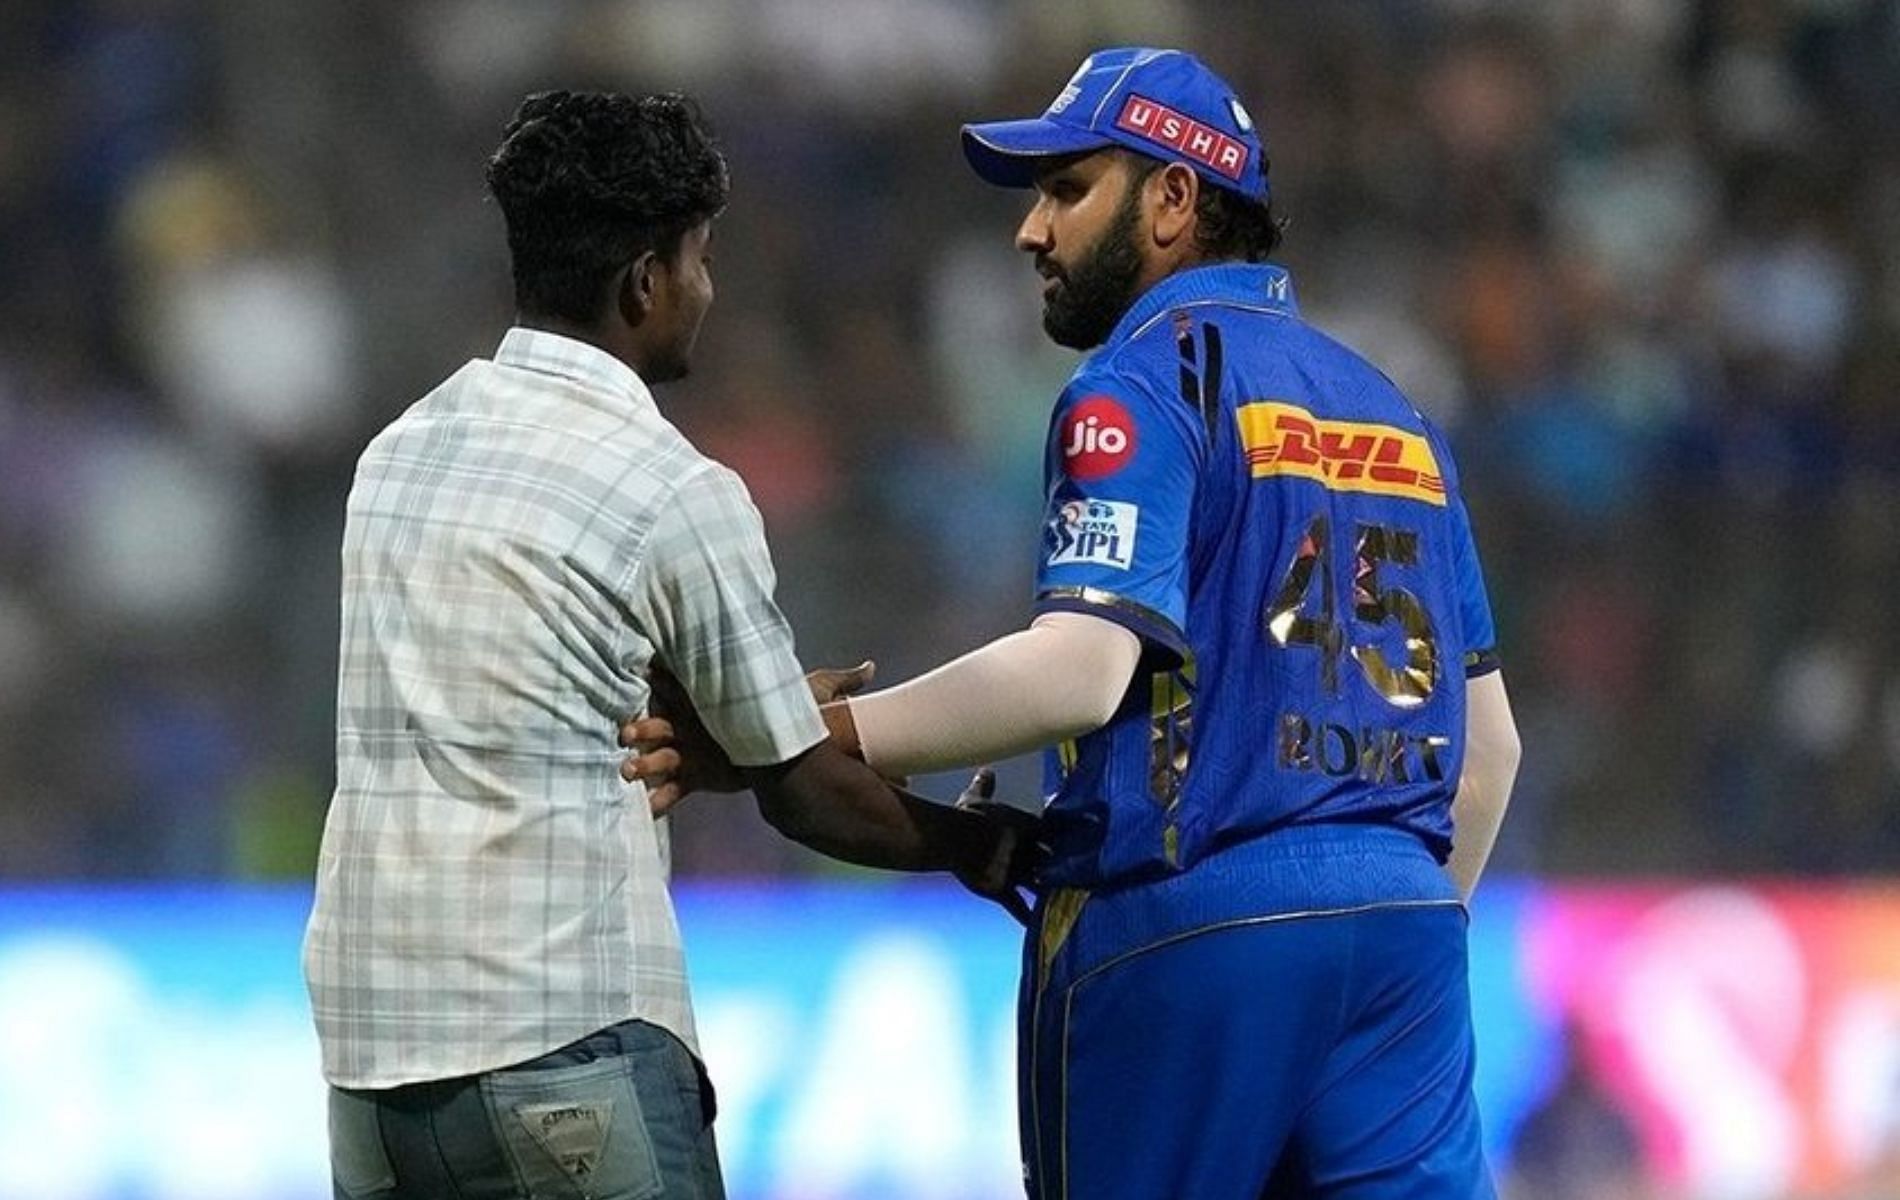 Rohit Sharma (R) was visibly surprised to see the fan on the field.